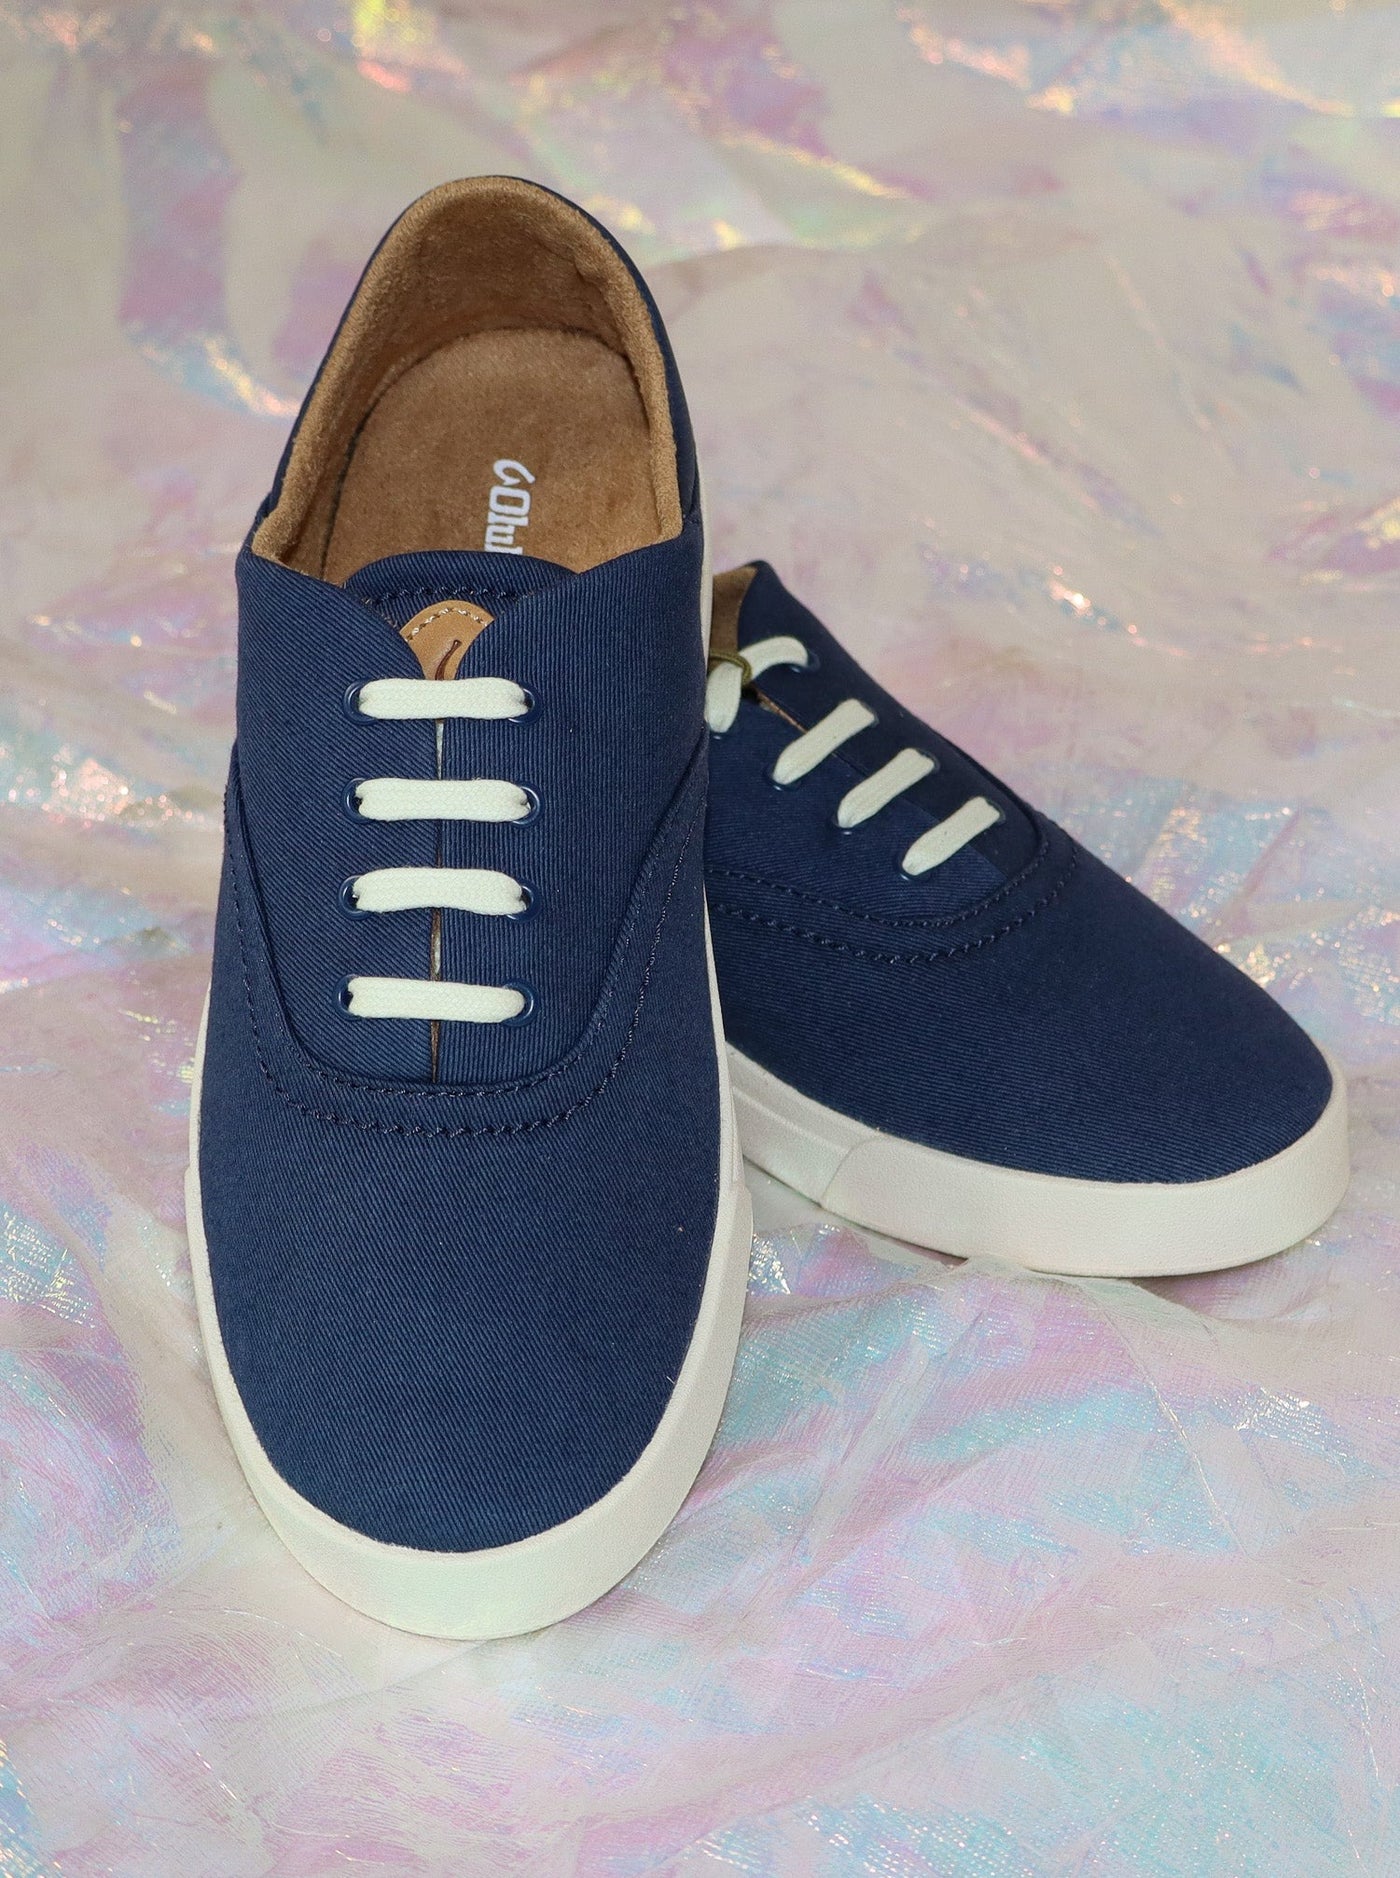 Vans style low rise navy lace up sneakers. 